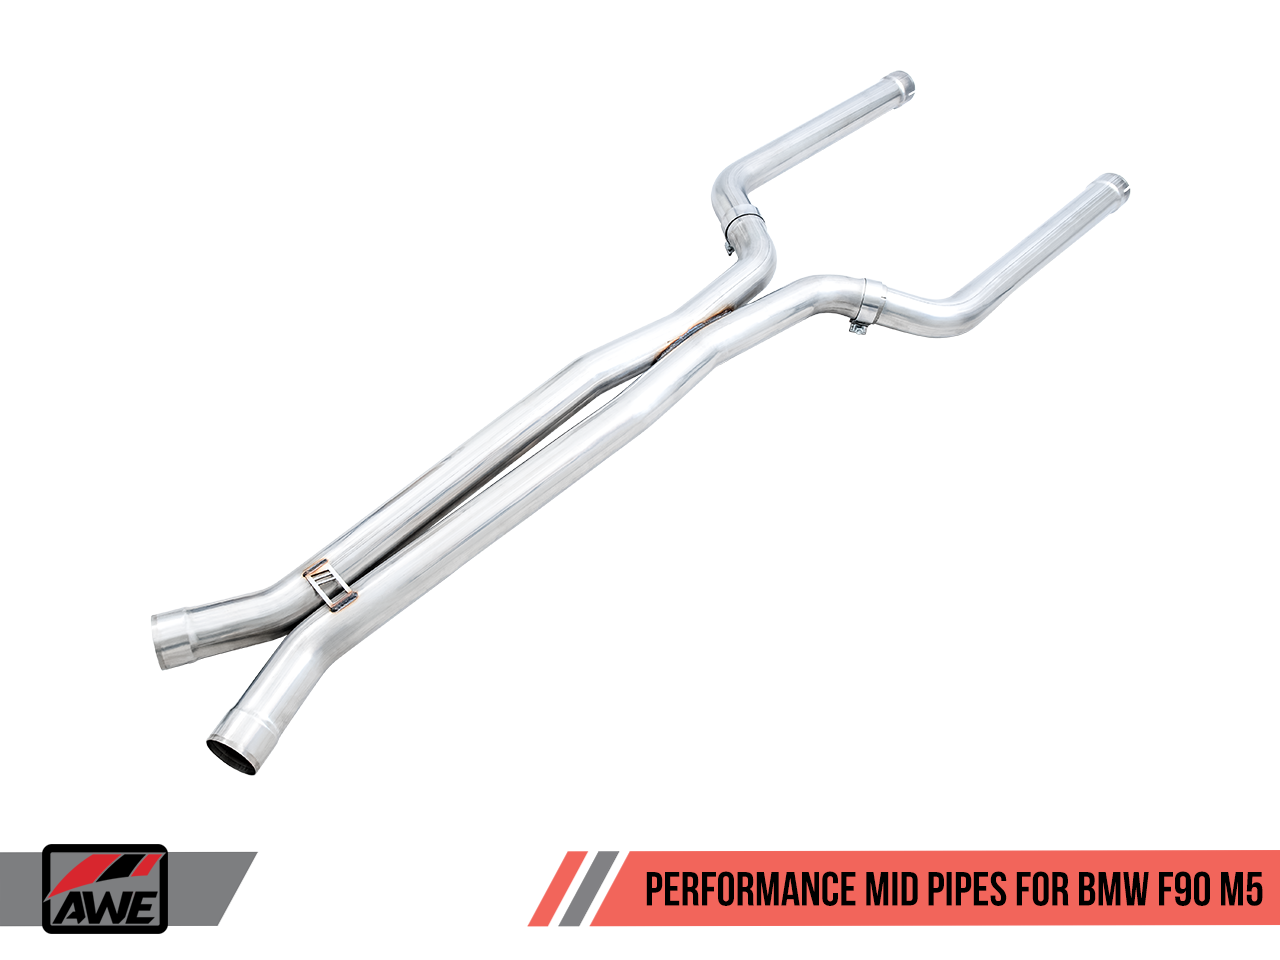 AWE Performance Mid Pipes for BMW F90 M5